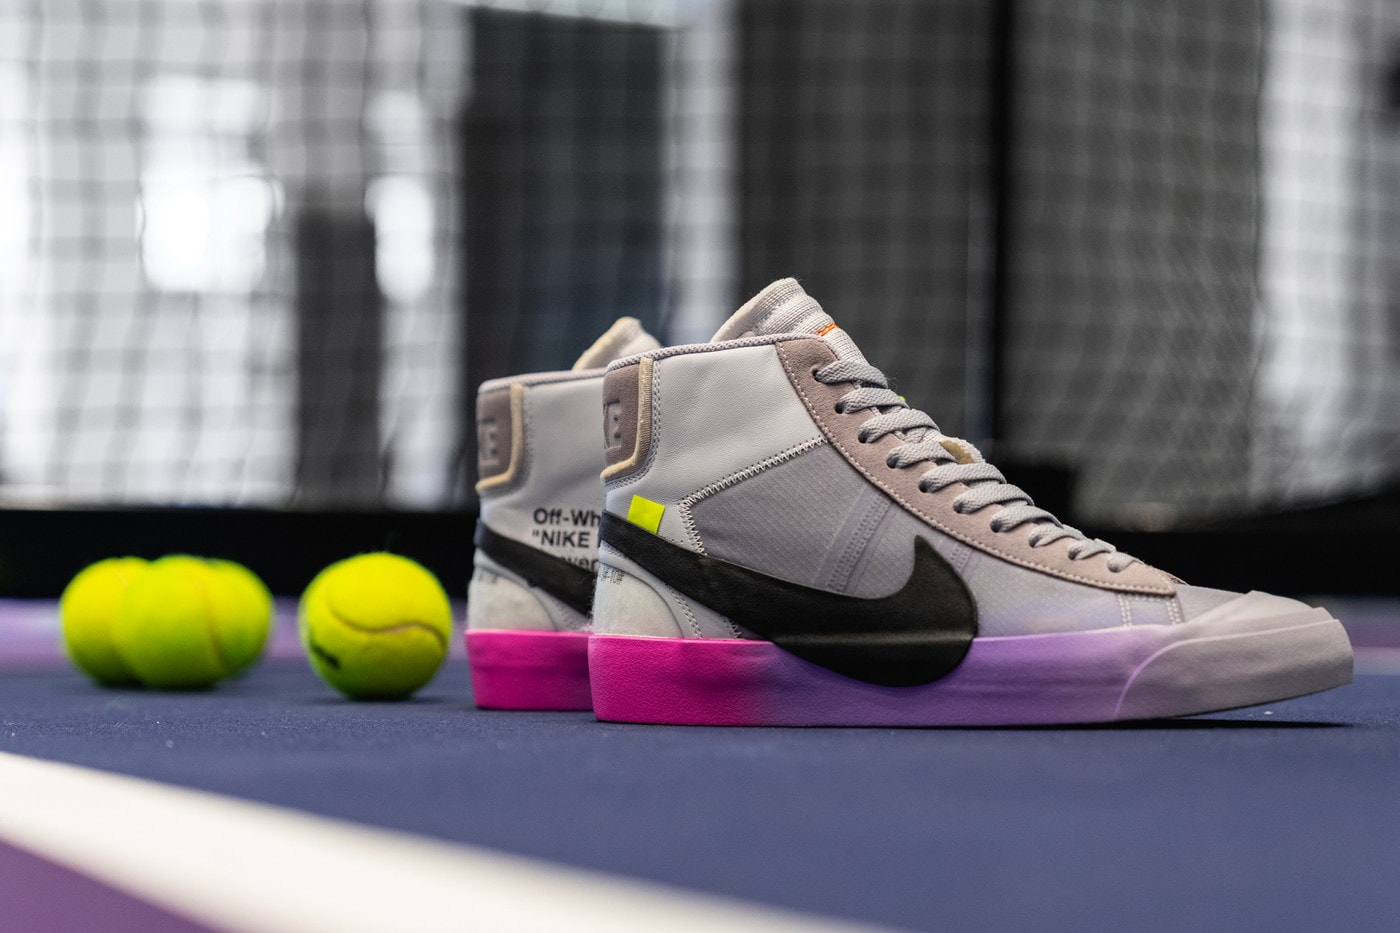 Off-white nike blazer mid queen serena williams snrks release difficulties android iphone exclusive sneakers footwear 